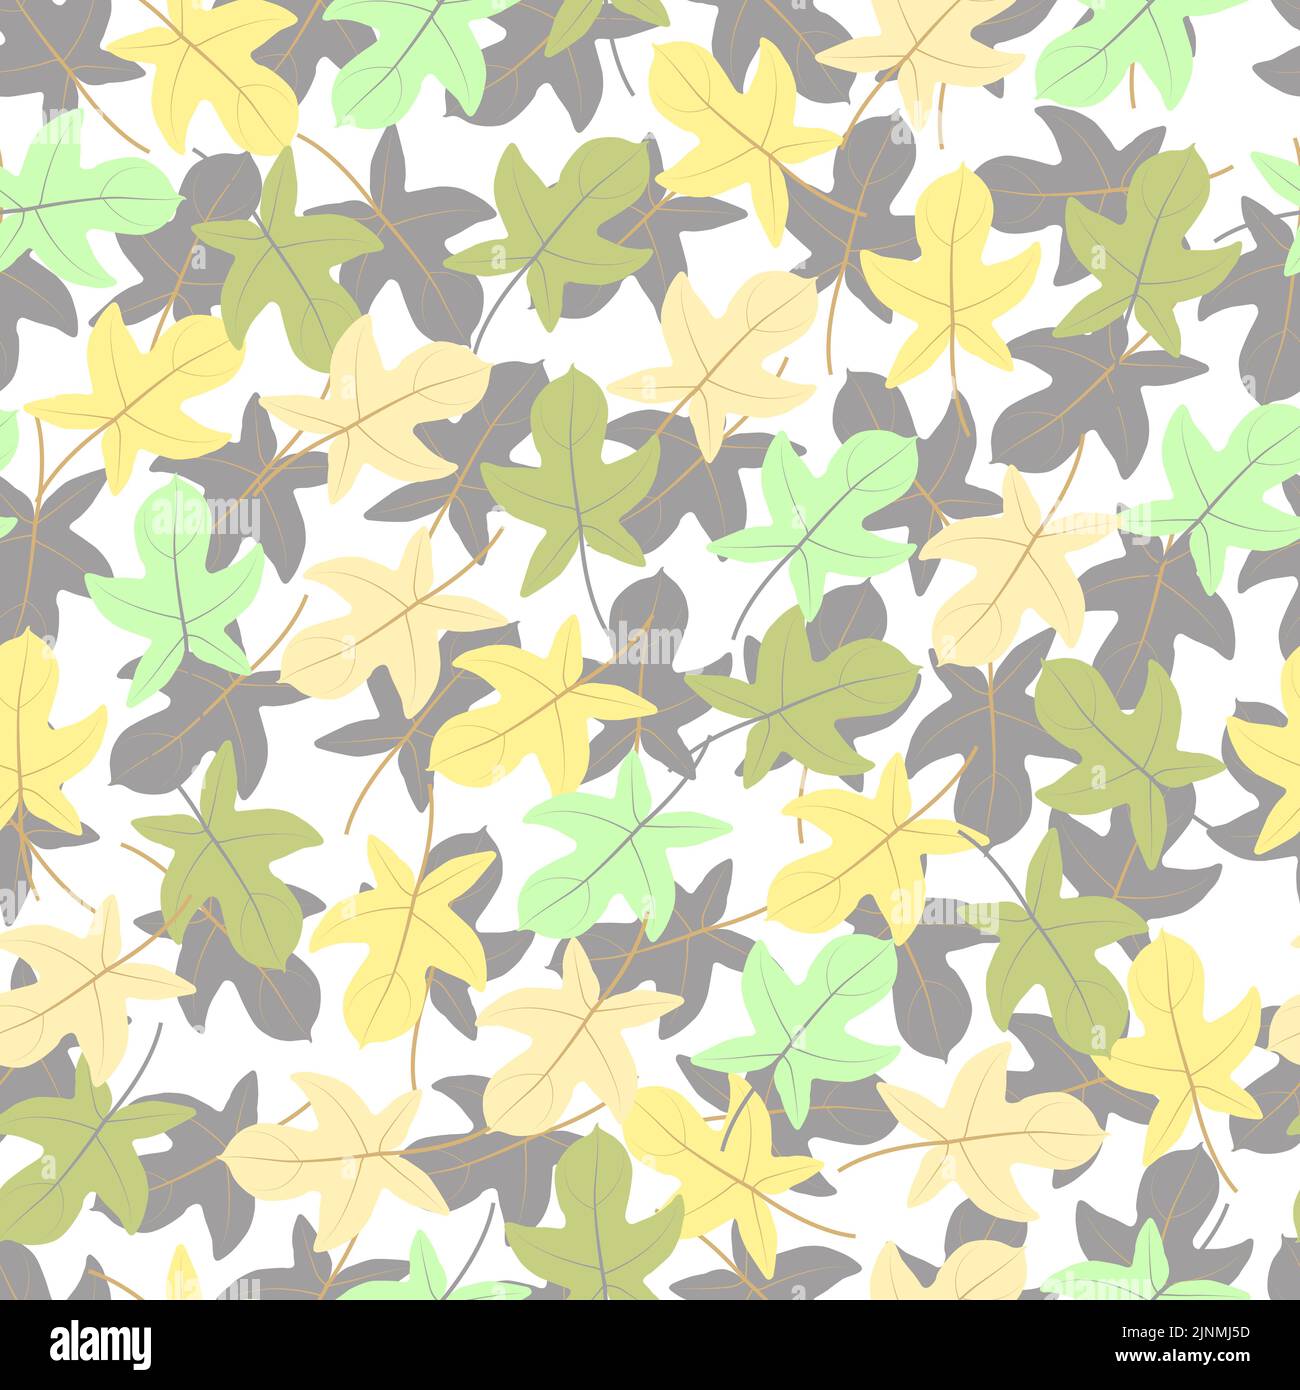 Ornate trendy ditsy floral seamless pattern design. Exotic abstract leaves. Artistic foliage background. Composite overlay for printing and textile Stock Vector